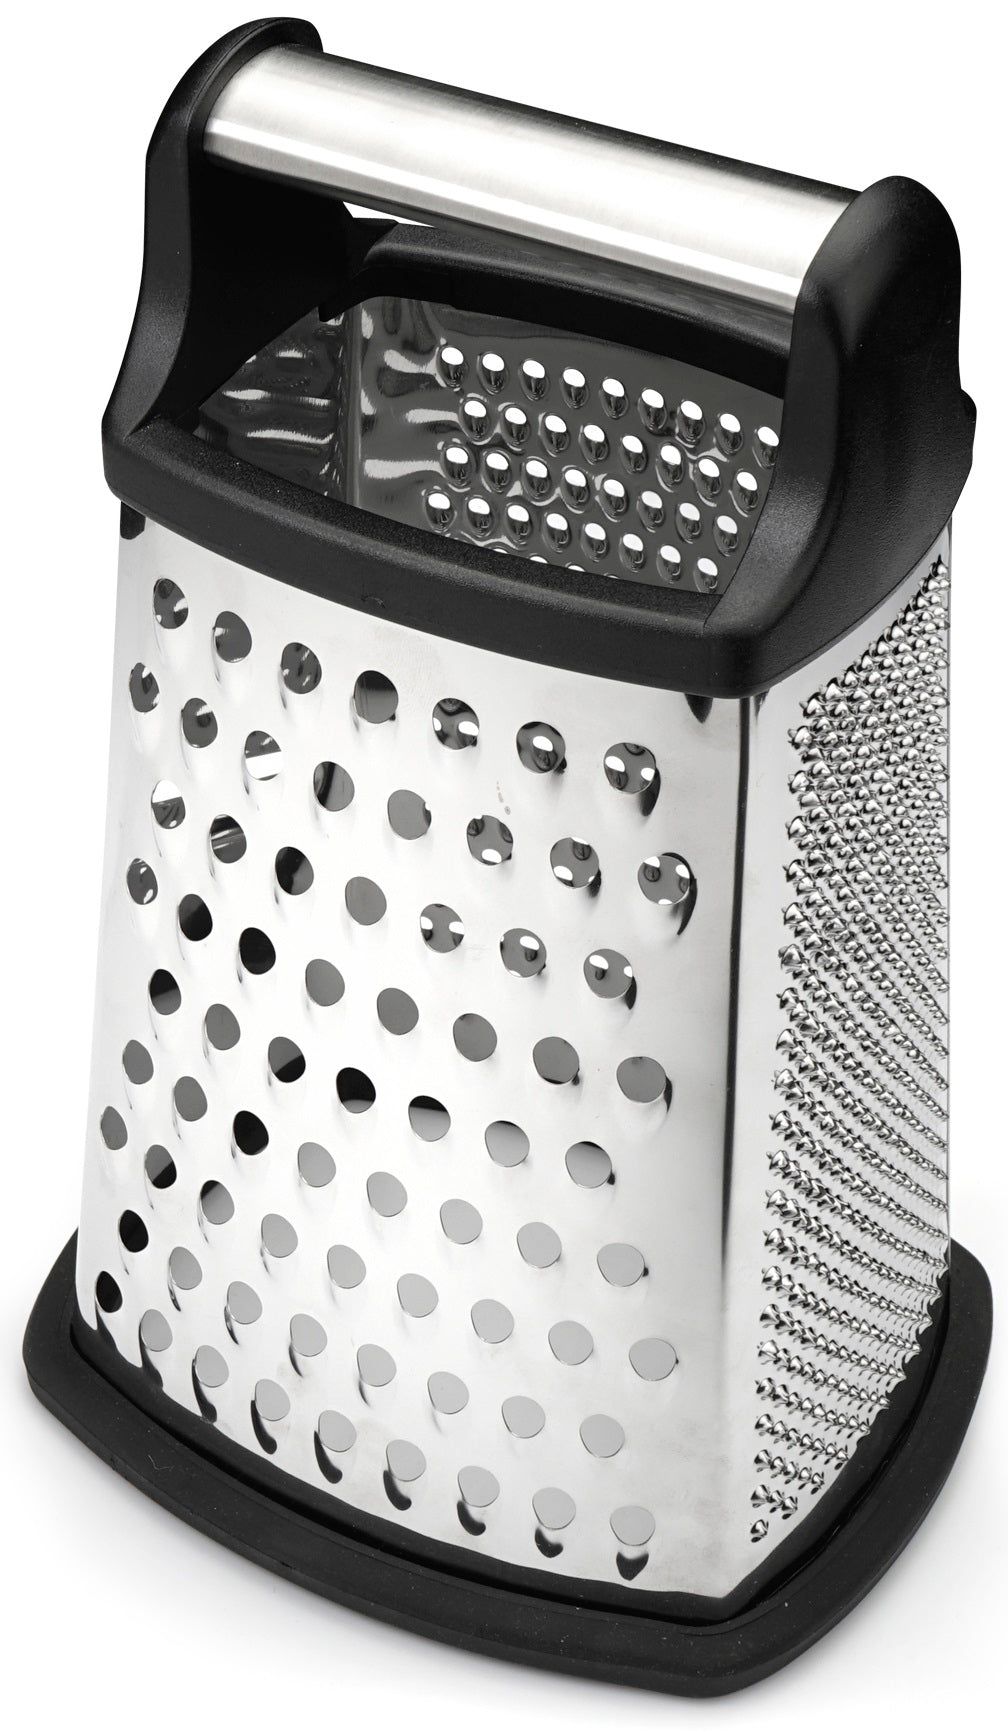 Spring Chef Professional Cheese Grater - Stainless Steel 4 Sided Box Grater  for Kitchen, XL Size - Perfect Shredder for Parmesan Cheese, Carrot